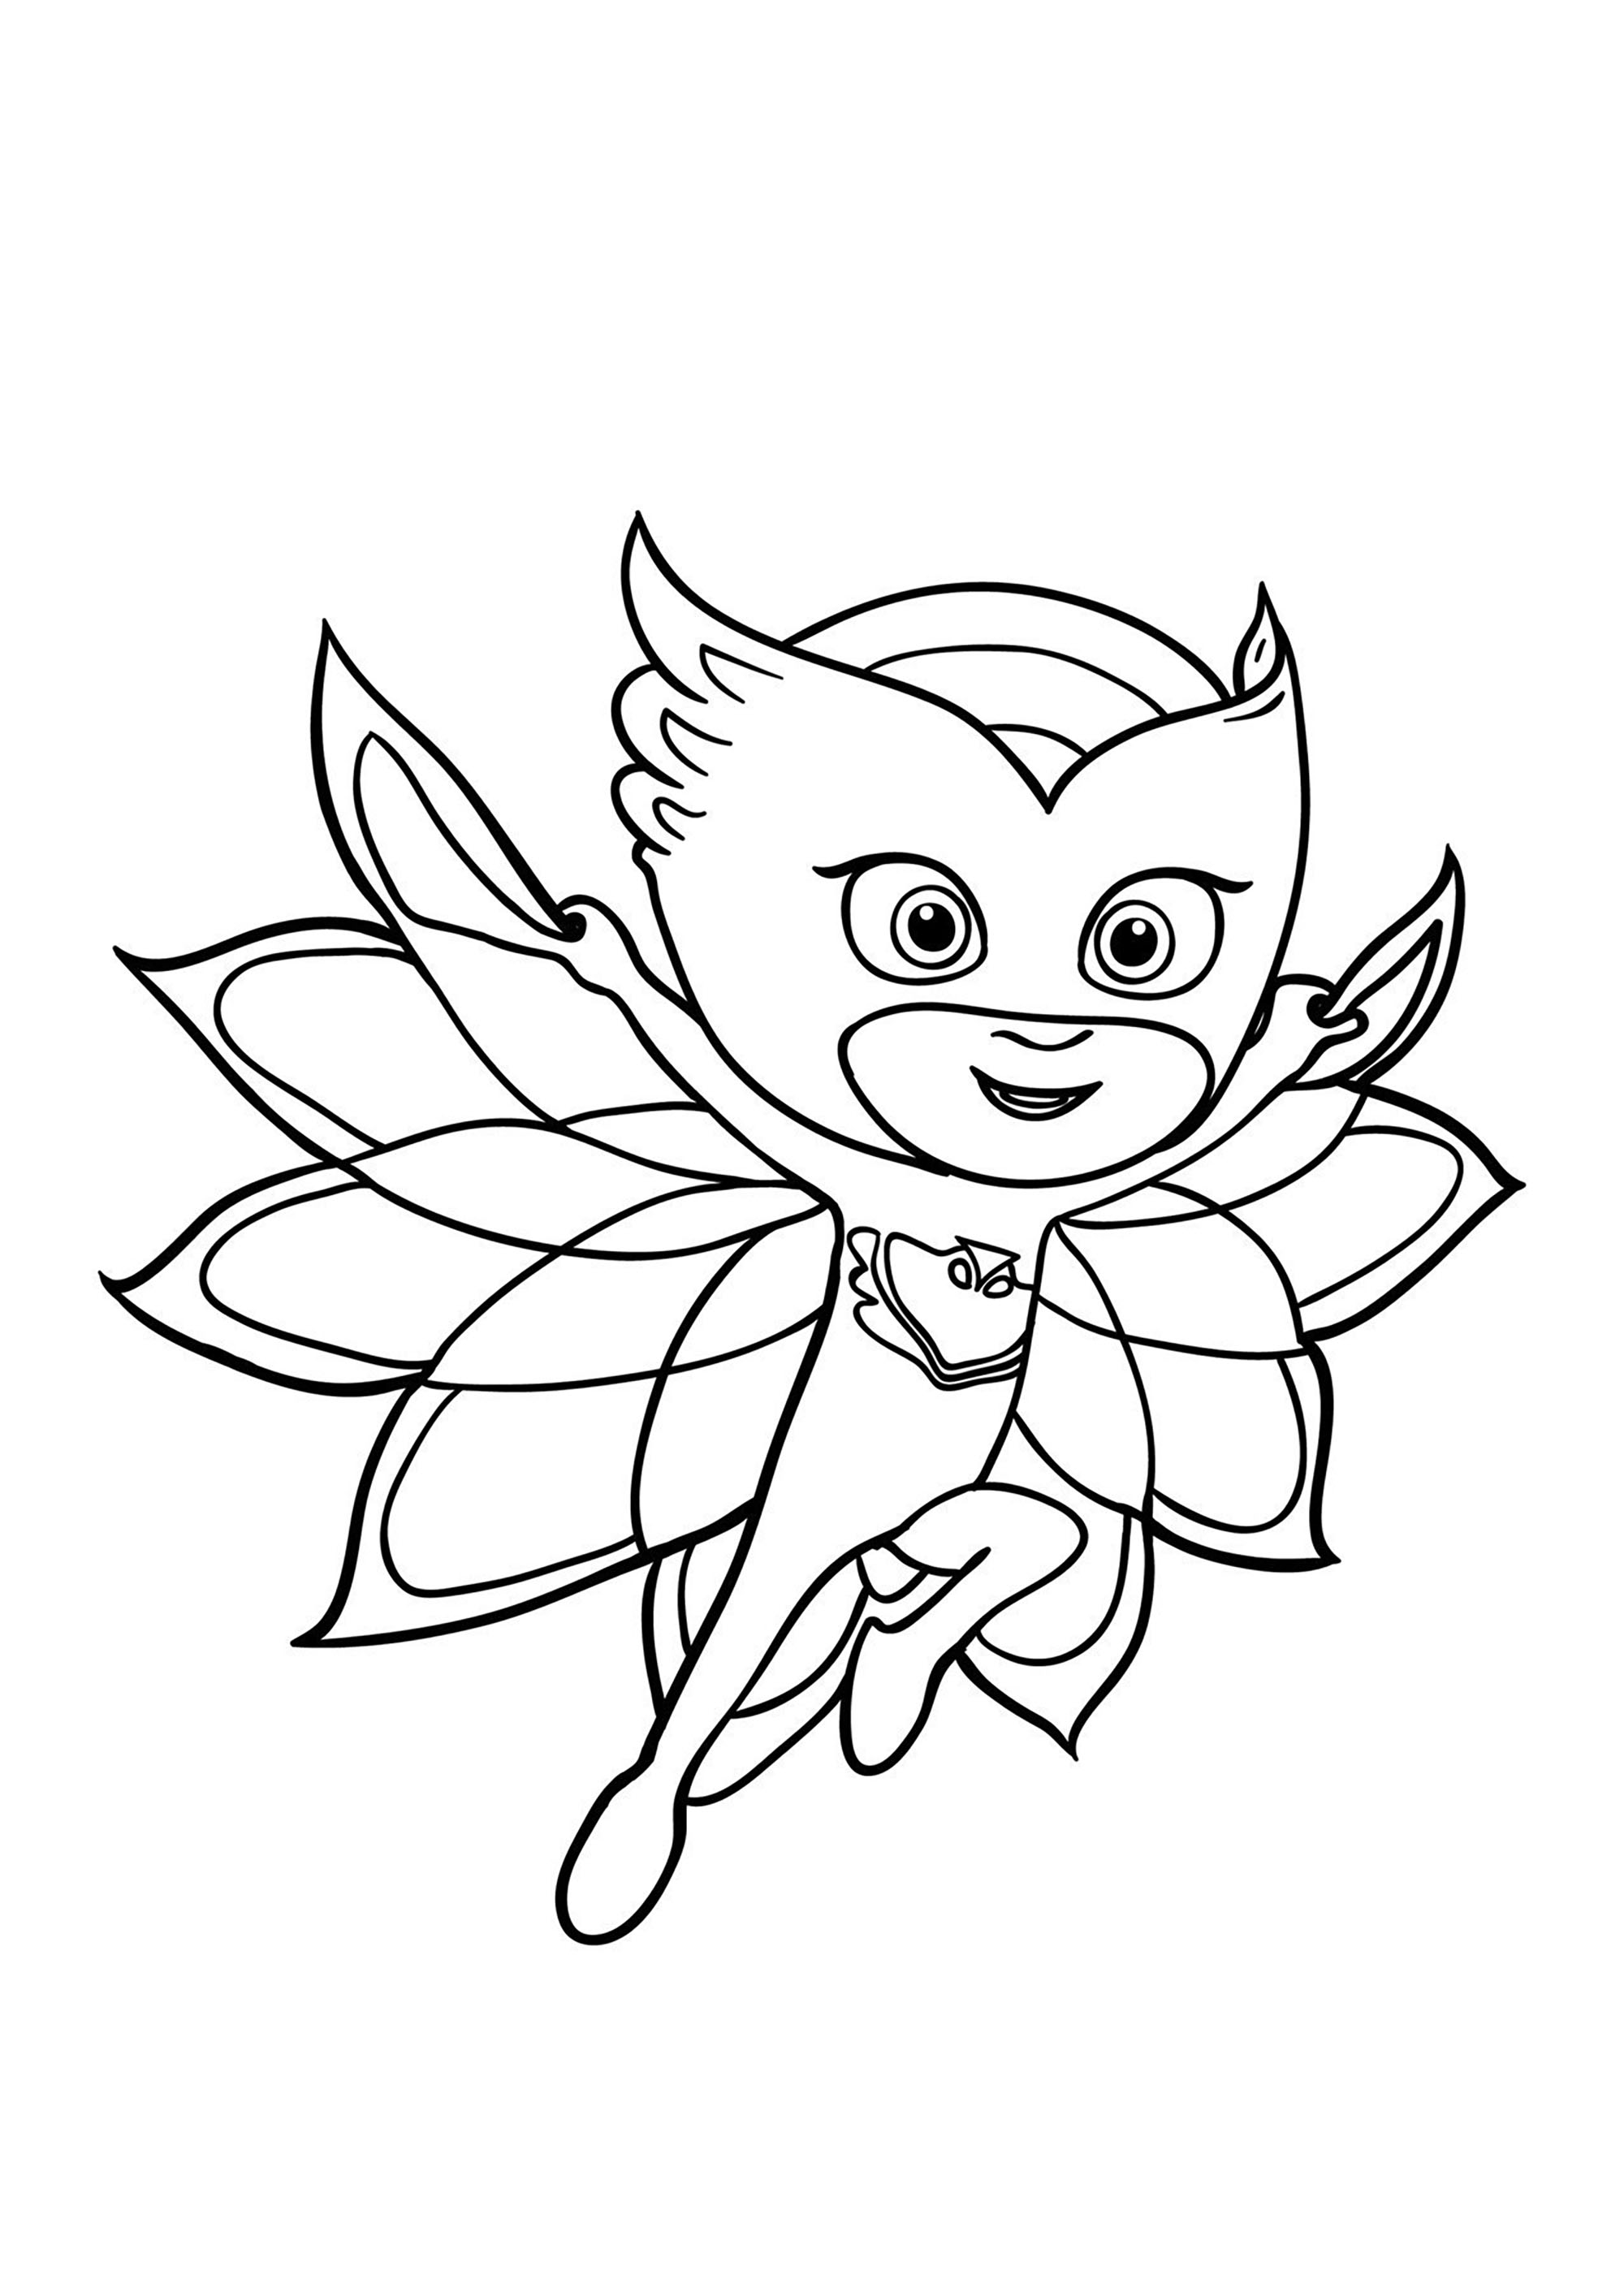 one-of-the-3-characters-of-the-pj-masks-series-pj-masks-kids-coloring